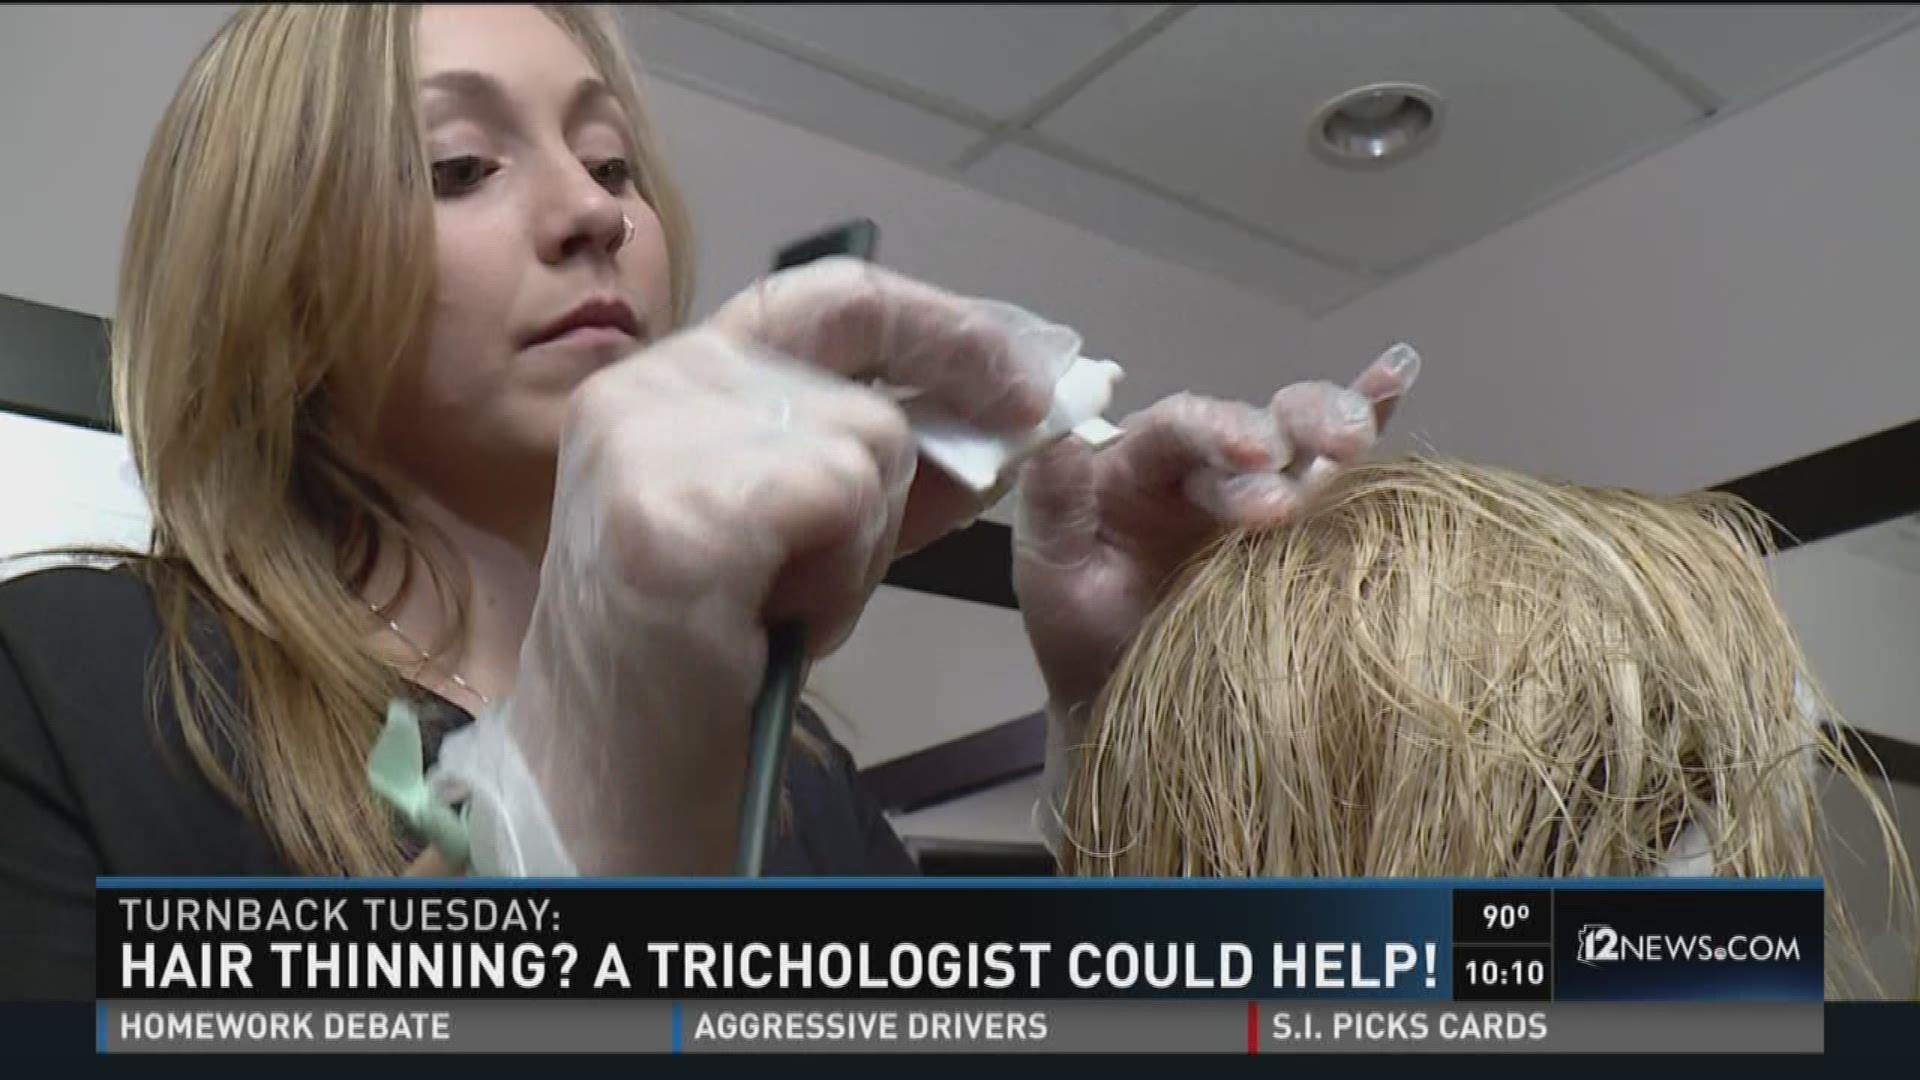 Hair thinning? a trichologist could help!